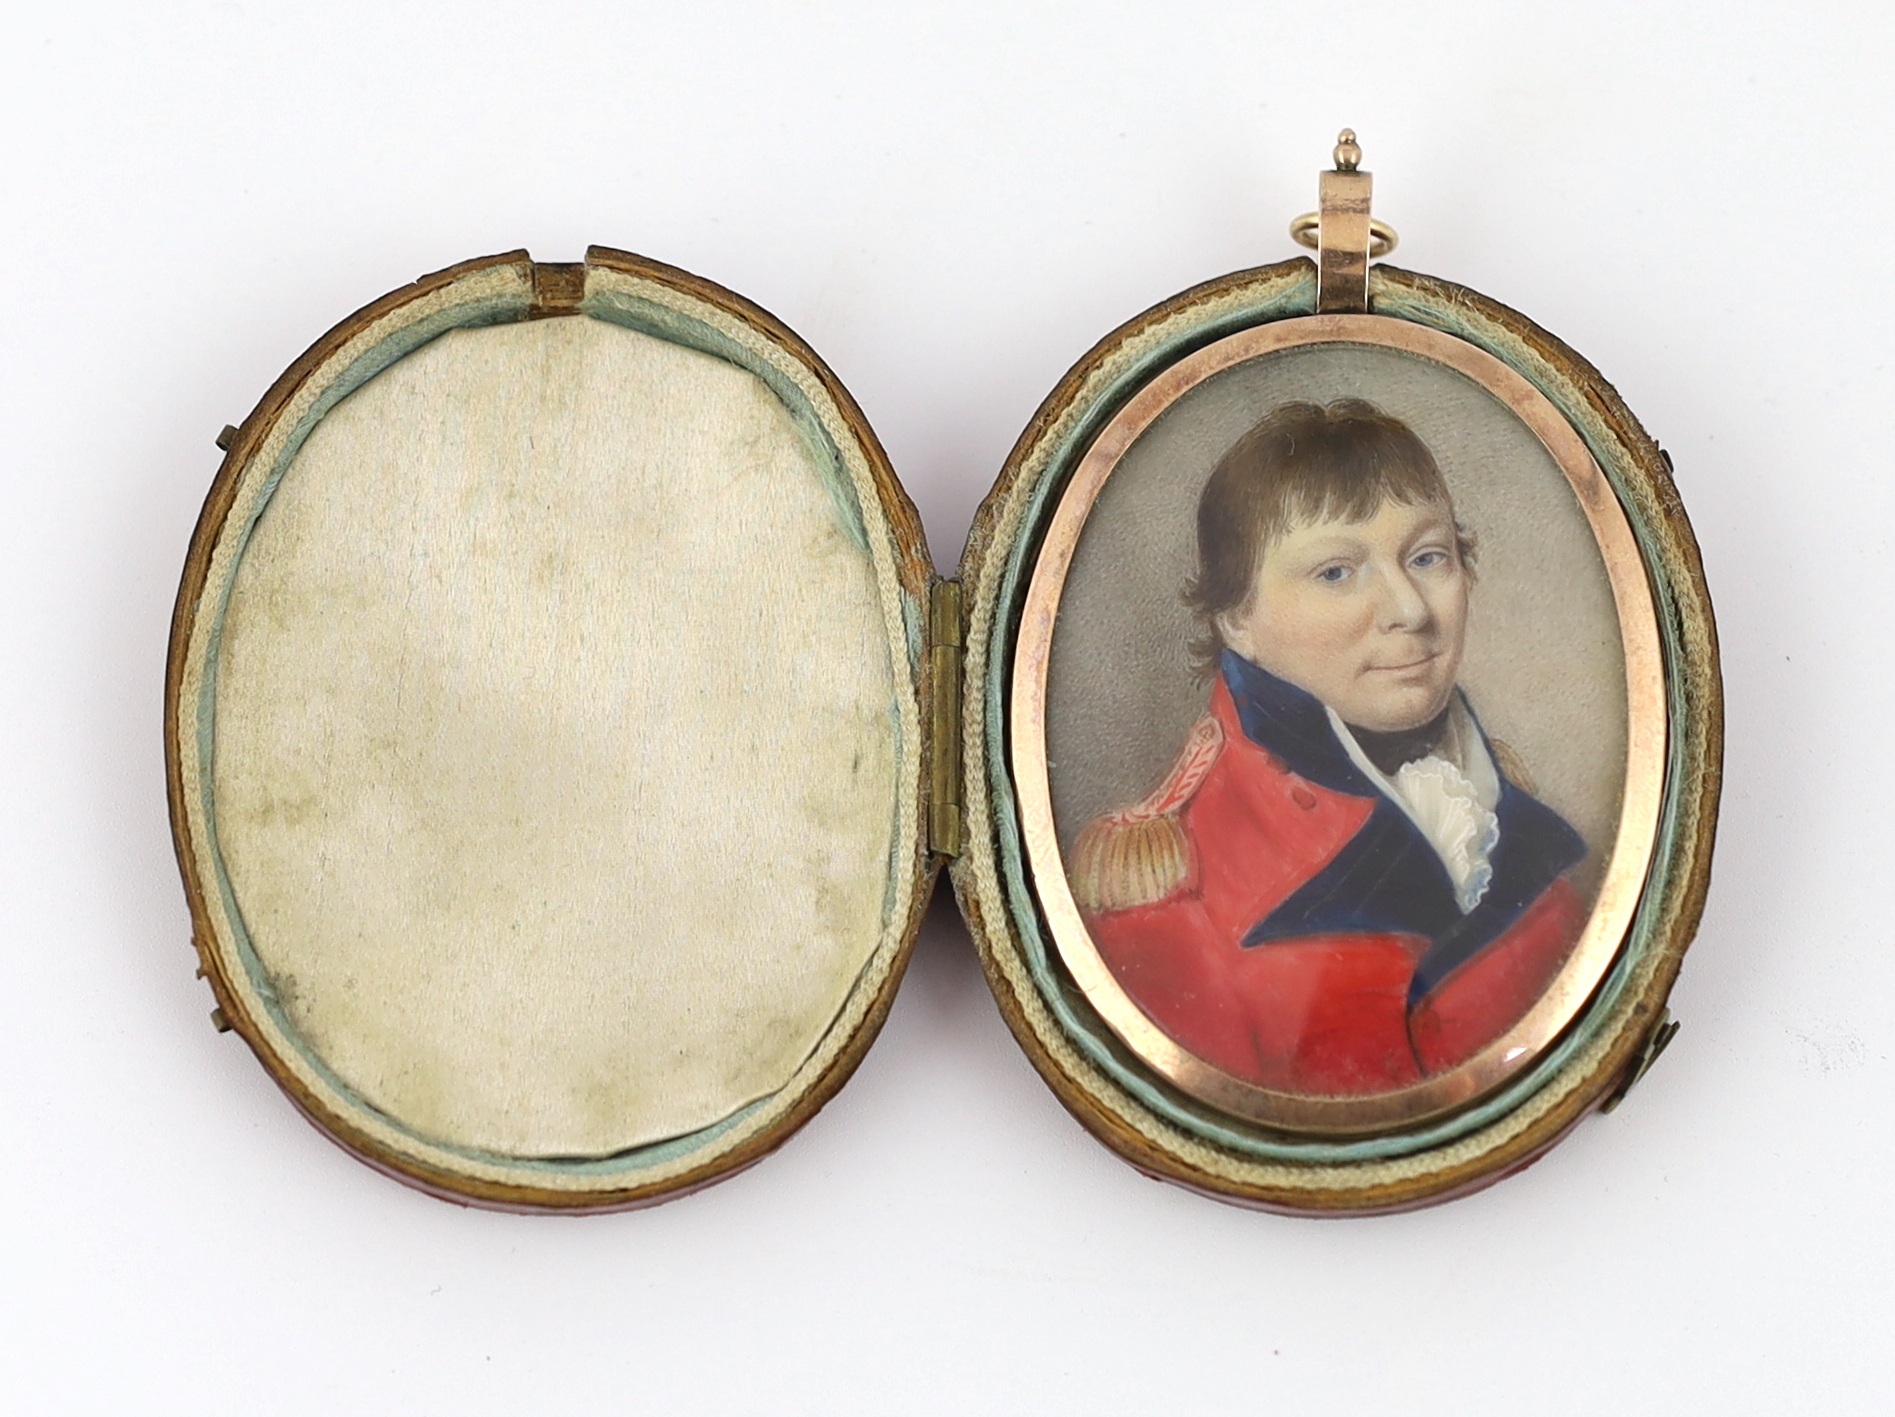 English School circa 1800, Portrait miniature of an army officer, watercolour on ivory, 5.4 x 4.1cm. CITES Submission reference BJJY18BG